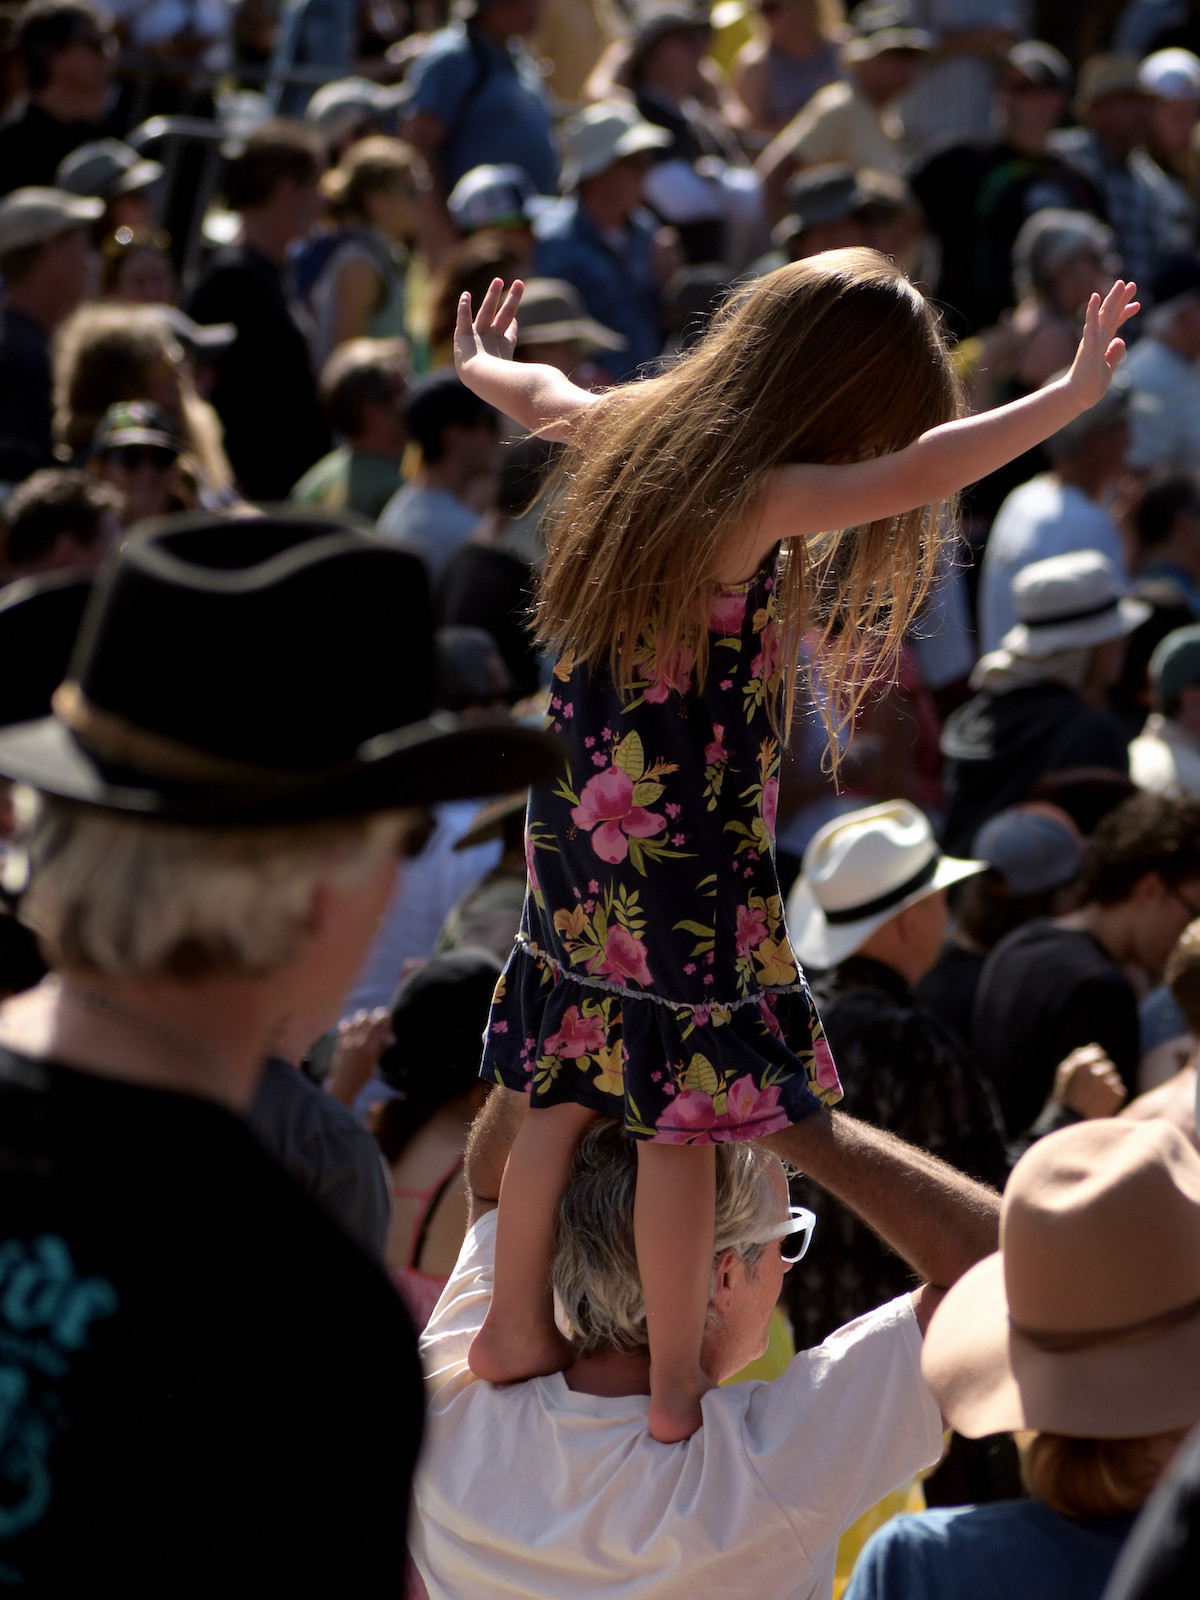 A girl wearing a black dress with pink flowers stands on a man's shoulders in a large crowd at a music festival in summer in San Francisco